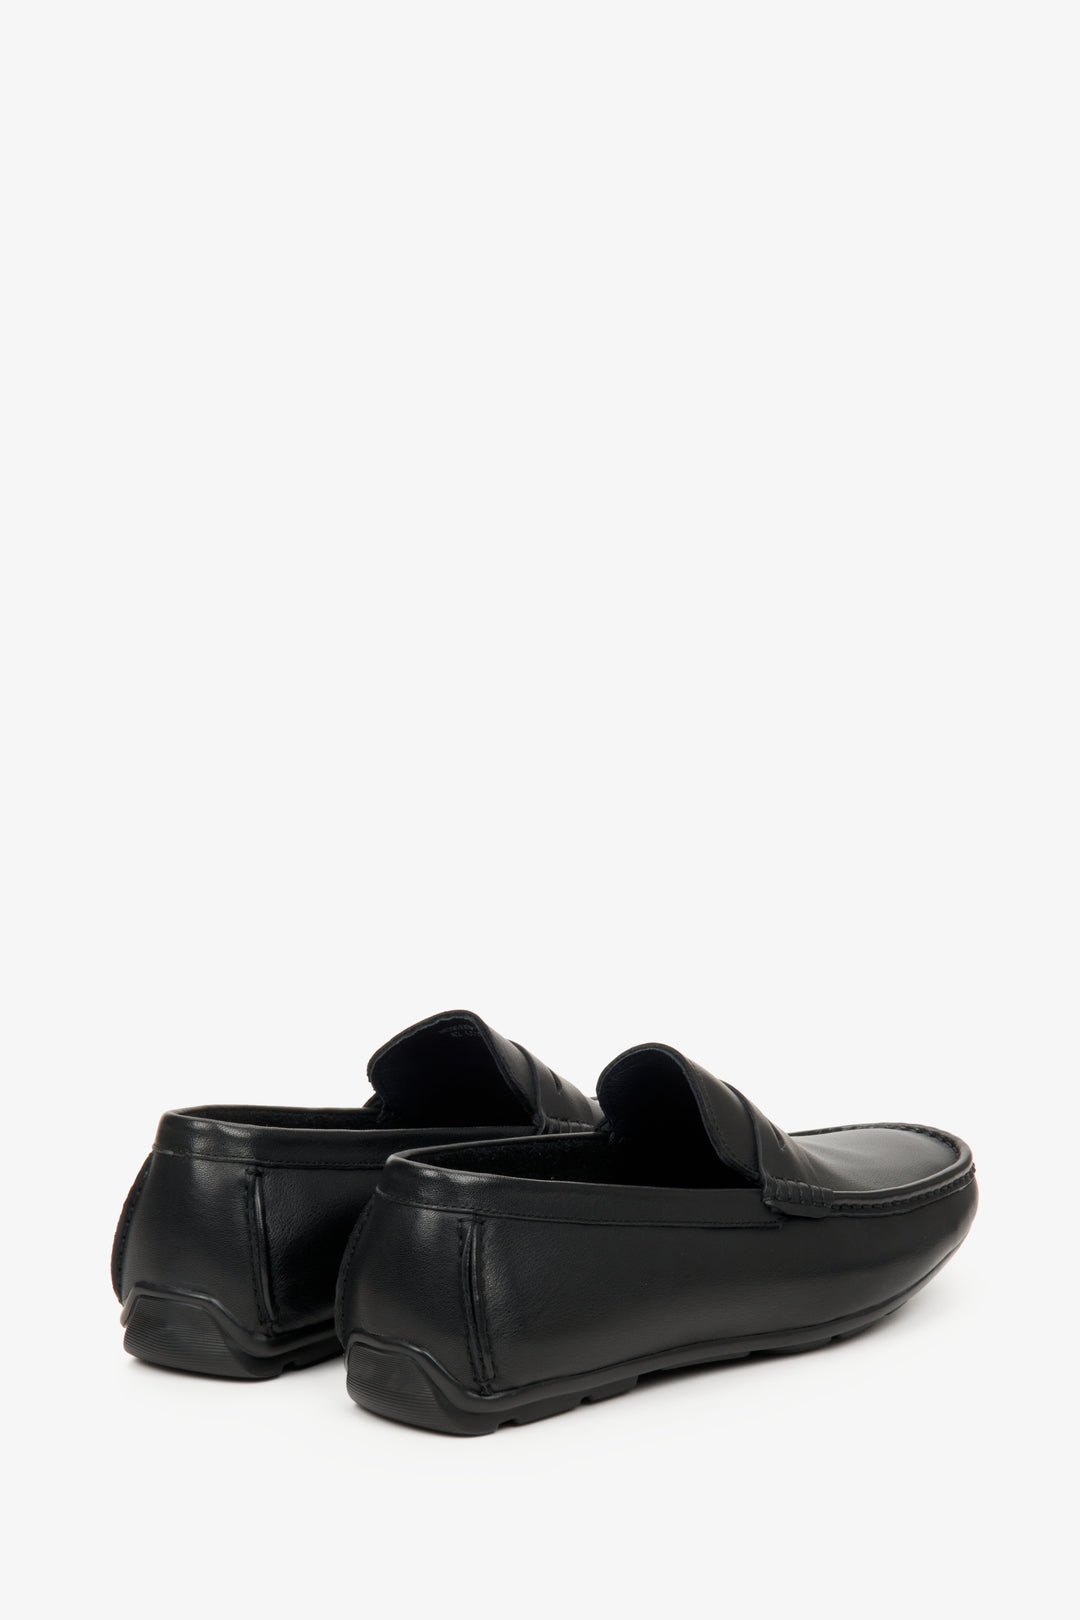 Estro men's leather loafers in black for spring and autumn - close-up on the heel and side seam of the shoes.